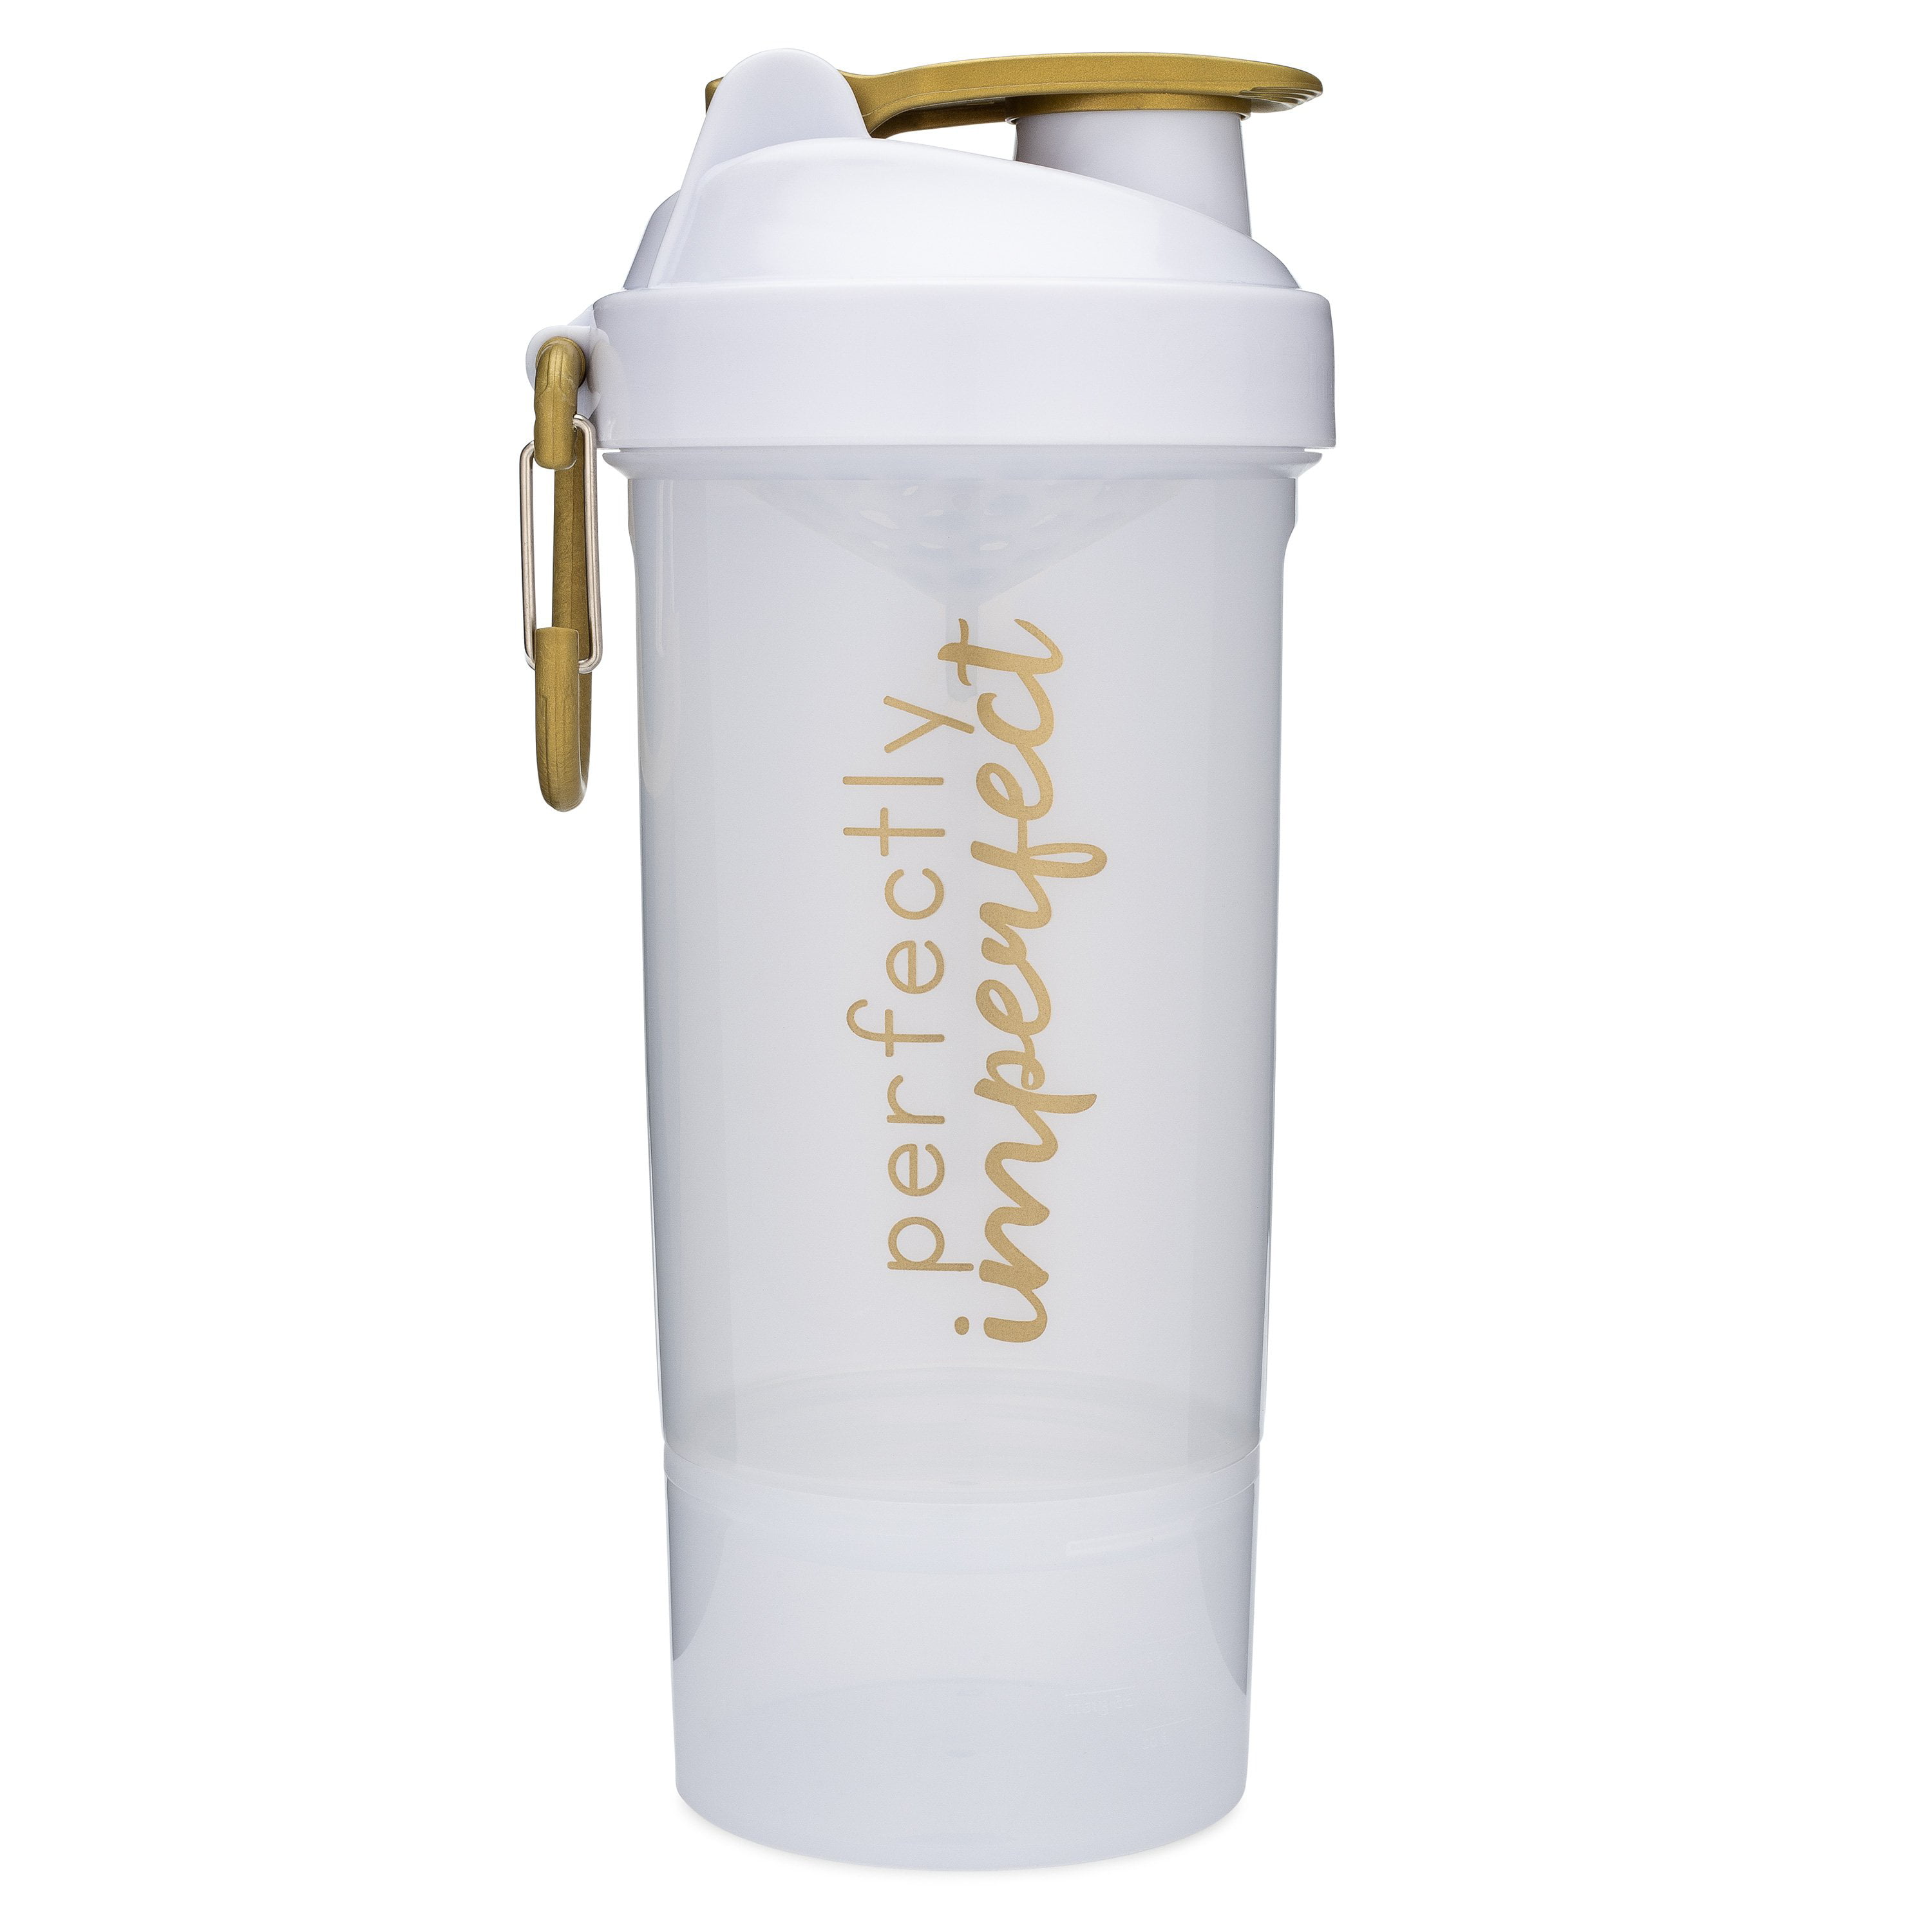 Shaker Bottle with Storage Cup